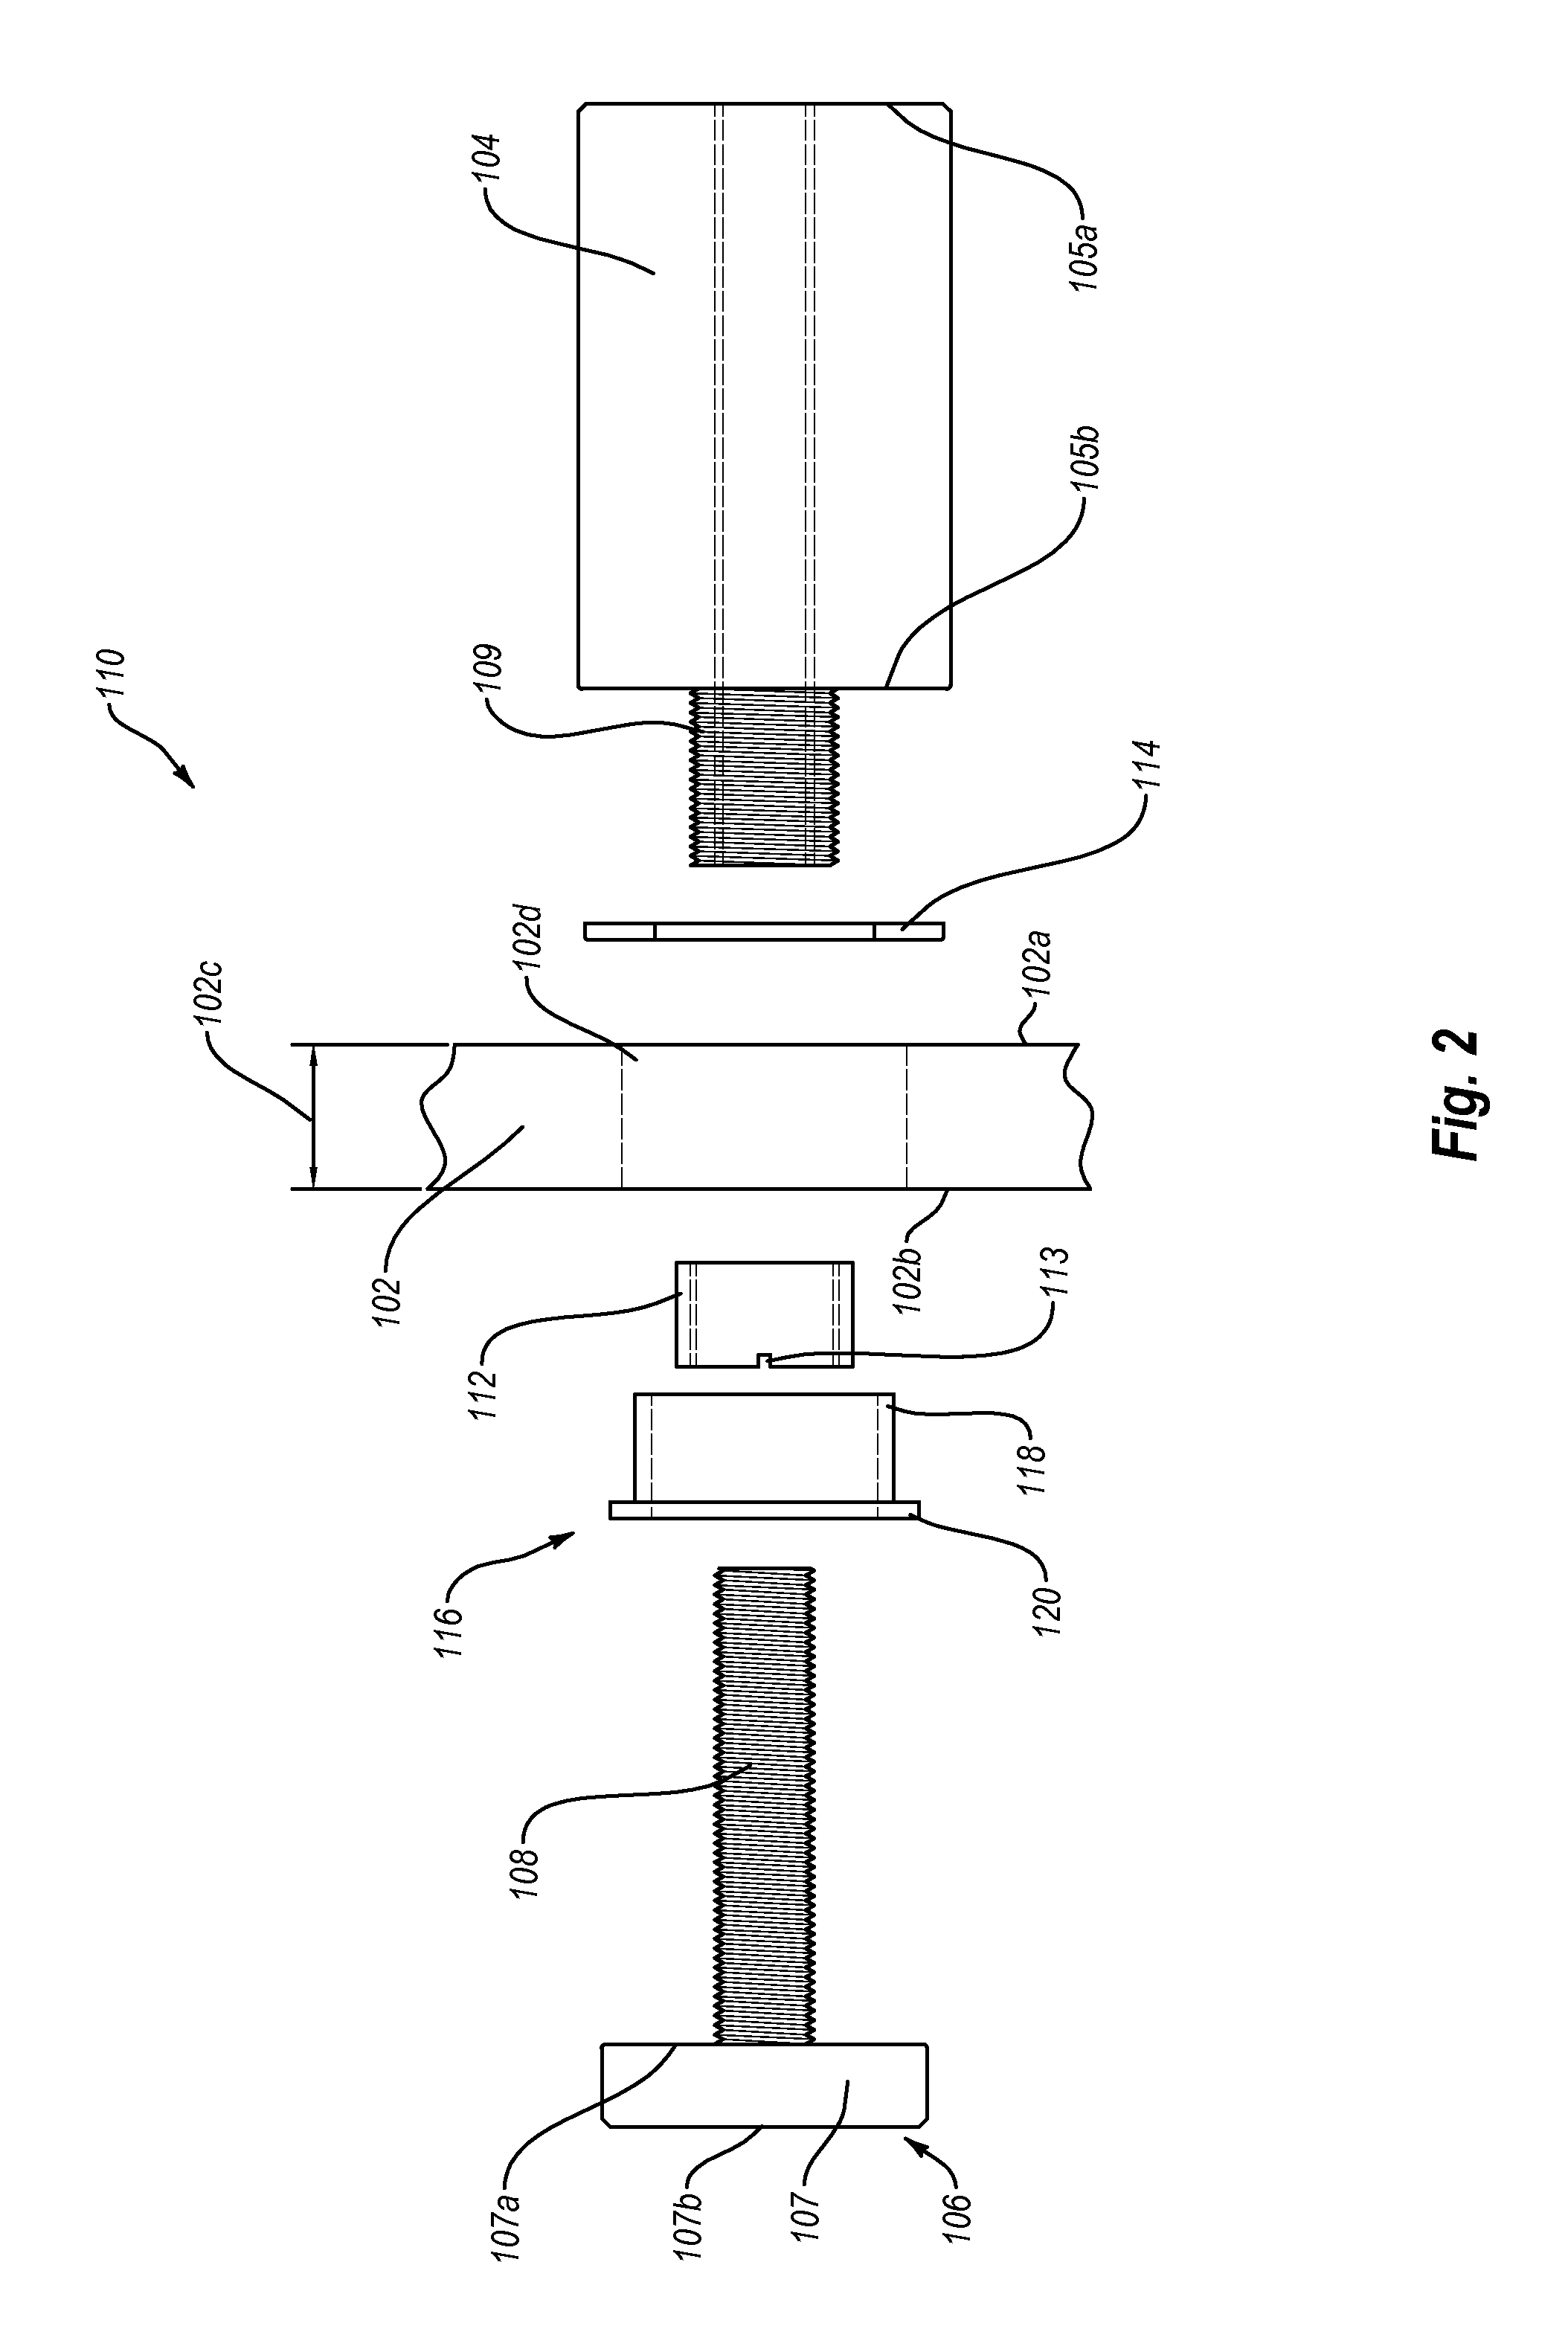 Adjustable bushing assemblies, panel mounting systems, and methods